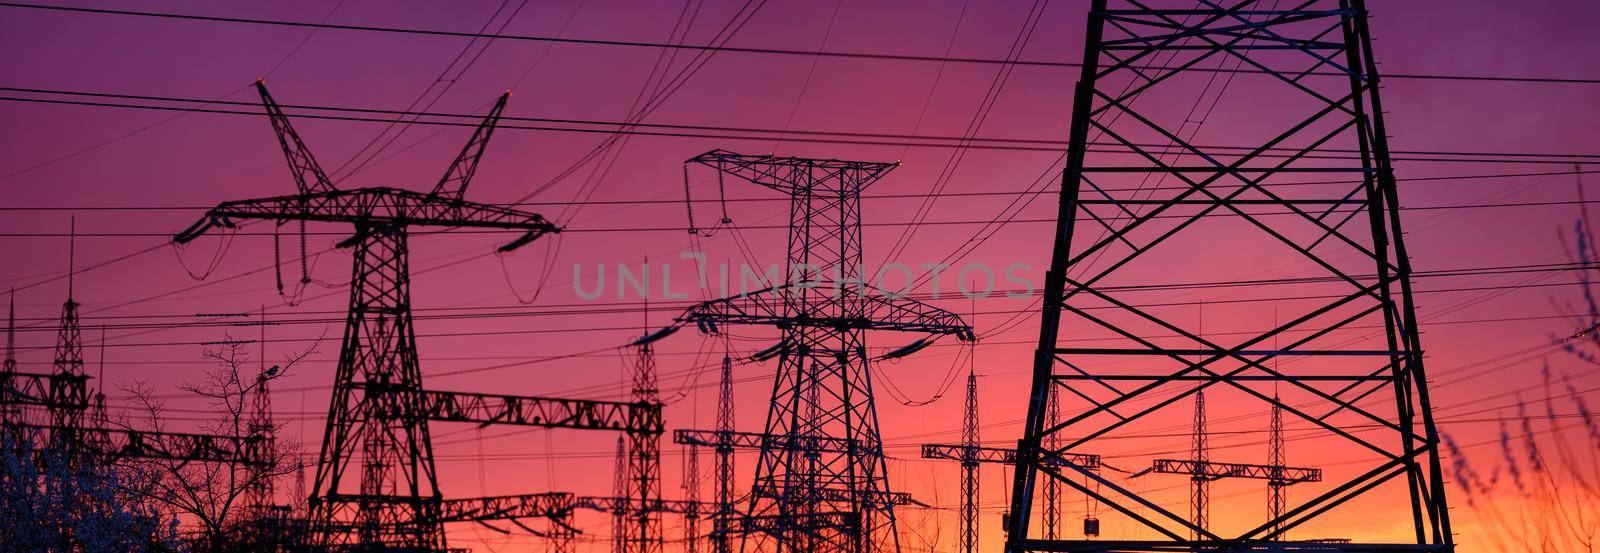 View of high voltage pole power transmission tower on sunset. Panorama high voltage tower with power lines. by igor010